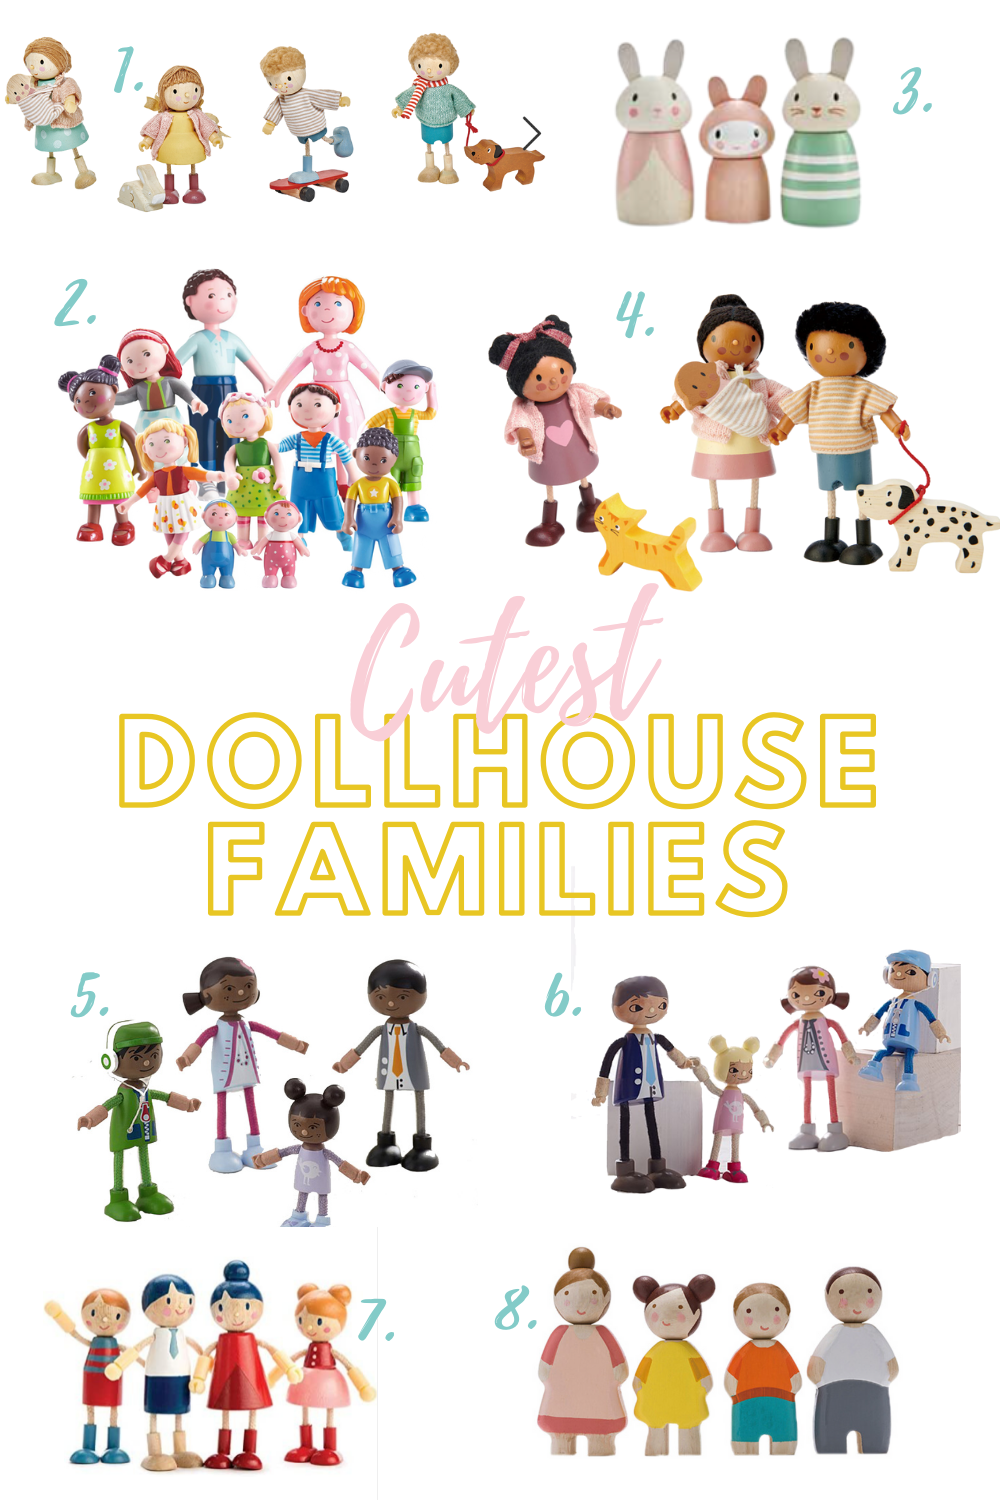 Looking for the cute dollhouse families? Check this out!! Cute and diverse dollhouse people for your dollhouse family. Check out these DIY tips for renovating your dollhouse